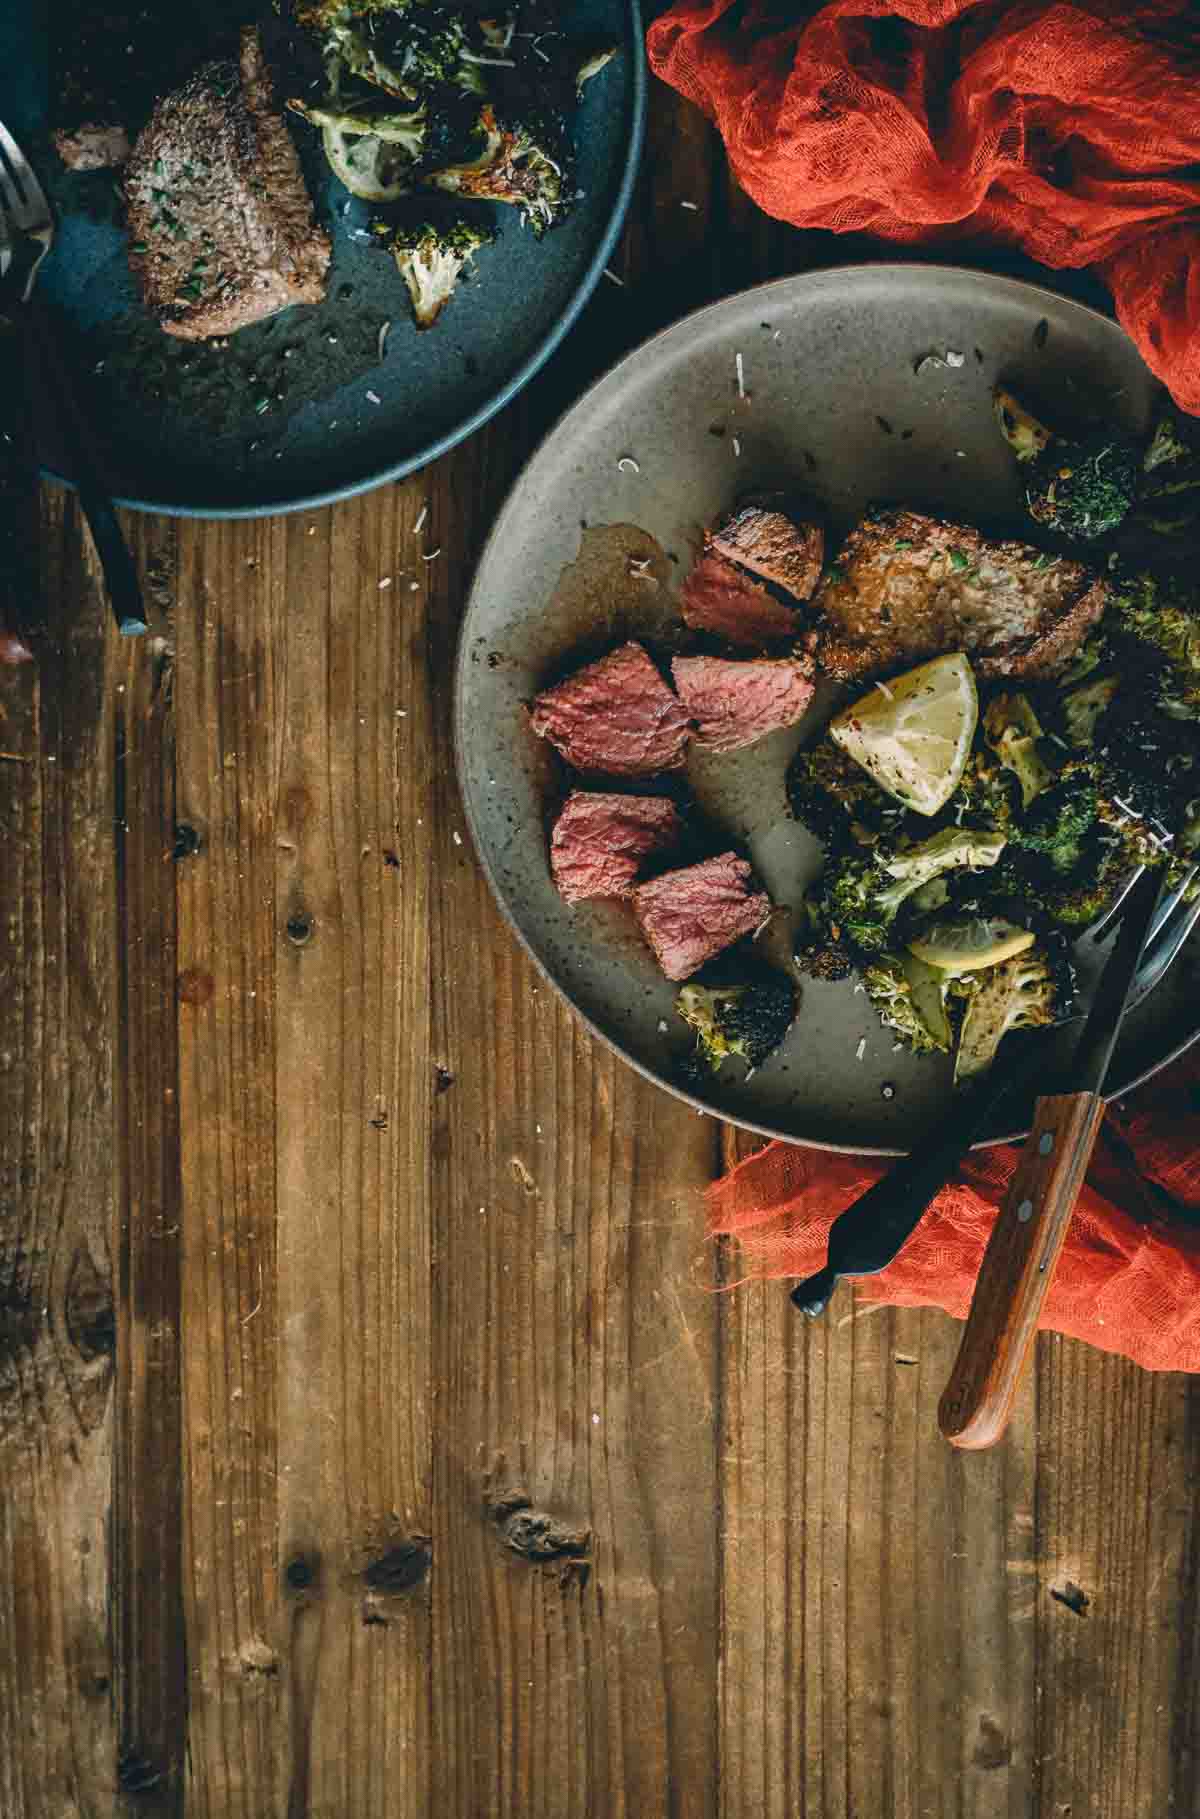 Overhead shot of 2 plates with venison steaks, one sliced, lemon wedge and roasted broccoli.